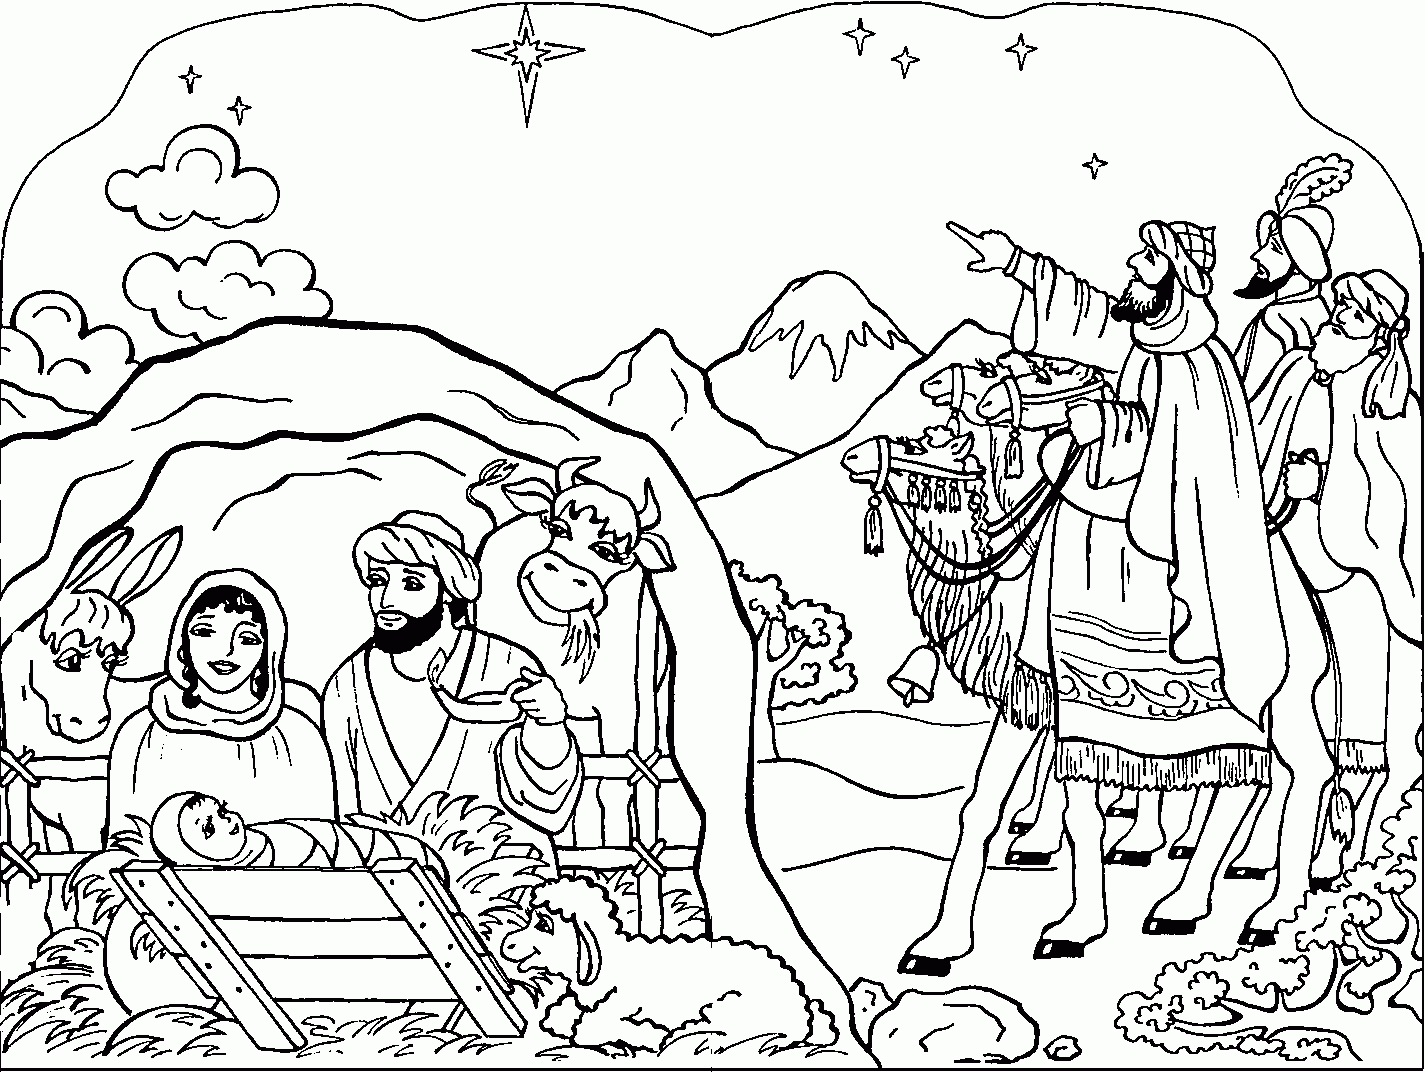 Printable Coloring Pages Of Nativity Scenes For Kids | Coloring - Free Printable Christmas Baby Jesus Coloring Pages